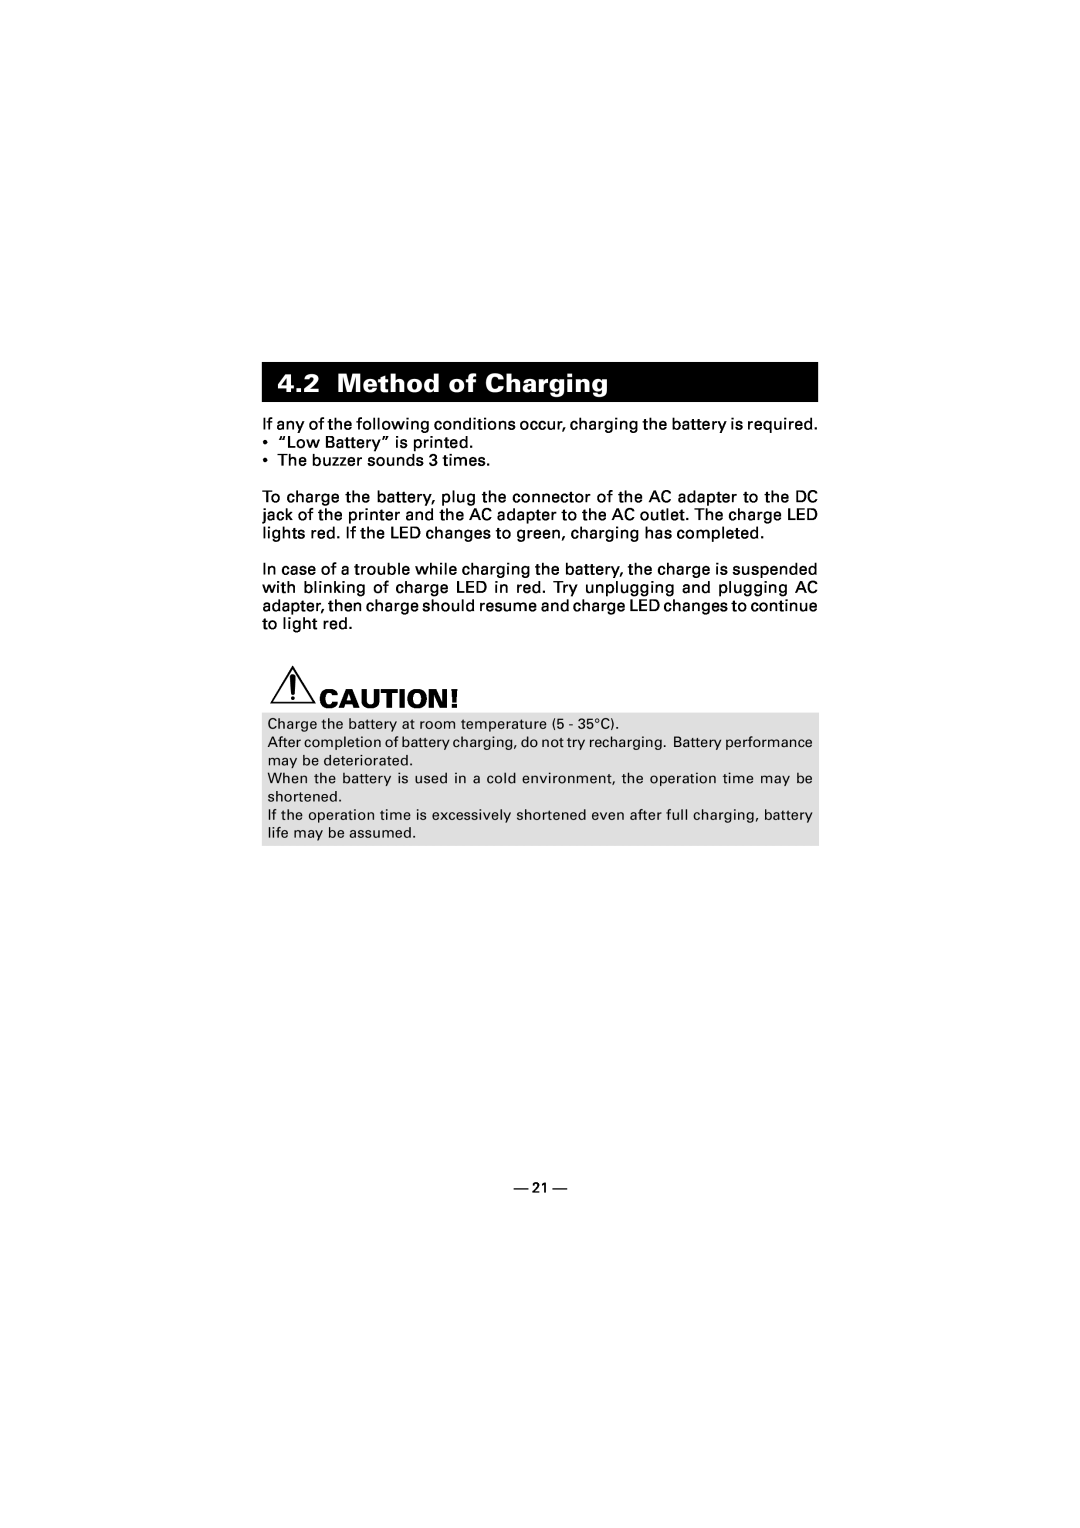 Citizen Systems CMP-10 manual Method of Charging 